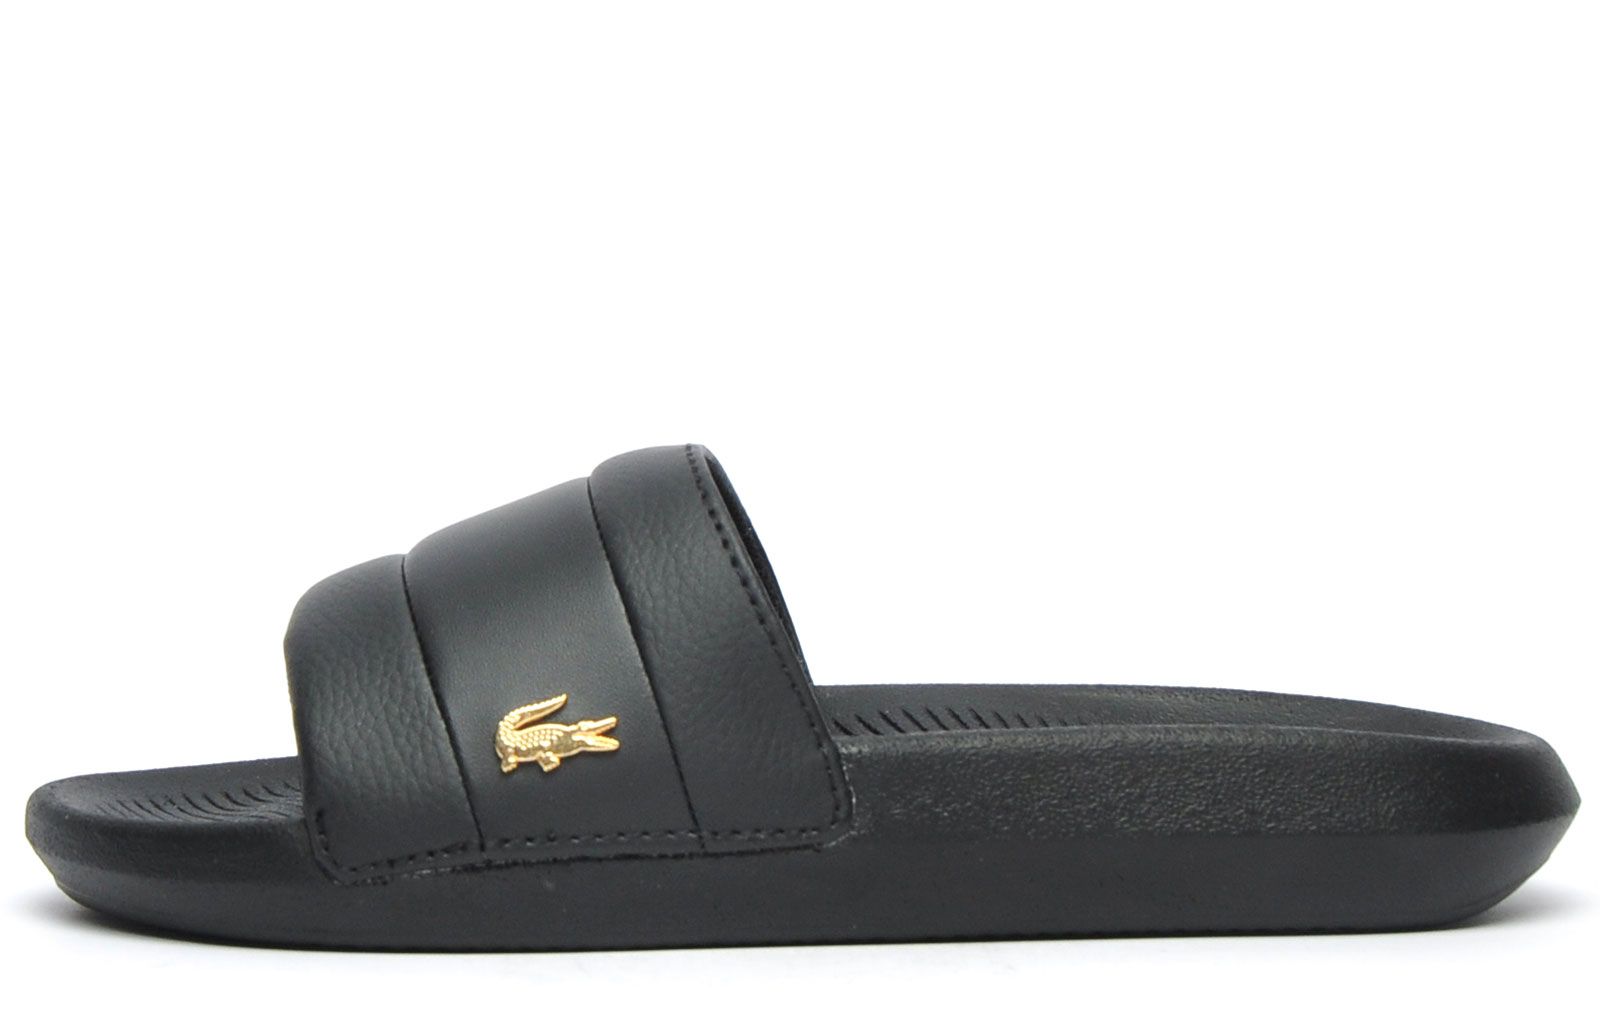 Step into on trend summer style with these women's / girlsCroco Slides from Lacoste. In a classic black colourway, these designer sandals are delivered in a smooth synthetic upper with band stripe detailing across the forefoot foot strap. The super comfy moulded footbed delivers the perfect fit and feel while the grippy outsole will keep you sure and safe around the pool or in the shower. These designer slides are finished with eye catching Lacoste branding throughout just in case you want a sign of approval that youre wearing cool chic style this summer season 
 - Synthetic comfort upper
 - Comfort moulded footbed
 - Single strap construction
 - Grippy outsole
 - Slip on wear
 - Iconic Lacoste branding throughout
 Please Note:
 These Lacoste Slides are sold as B grades which means there may be some very slight cosmetic issues on the shoe and they come in a poly bag. There could be occasional issues with wrong swing tags being allocated to wrong shoes by Lacoste themselves which could result in some size confusion but you must take the size IN THE SHOE as the size that the shoe actually is ( not what is on the tag ). We have checked most of the shoes and in our opinion,all are practically perfect without any blemishes on them at all and in essence if the shoes did not have the letter B denoted on the swing tag you would presume these were perfect shoes. All shoes are guaranteed against fair wear and tear and offer a substantial saving against the normal high street price. The overall function or performance of the shoe will not be affected by any minor cosmetic issues. B Grades are original authentic products released by the brand manufacturer with their approval at greatly reduced prices. If you are unhappy with your purchase, we will be more than happy to take the shoes back from you and issue a full refund